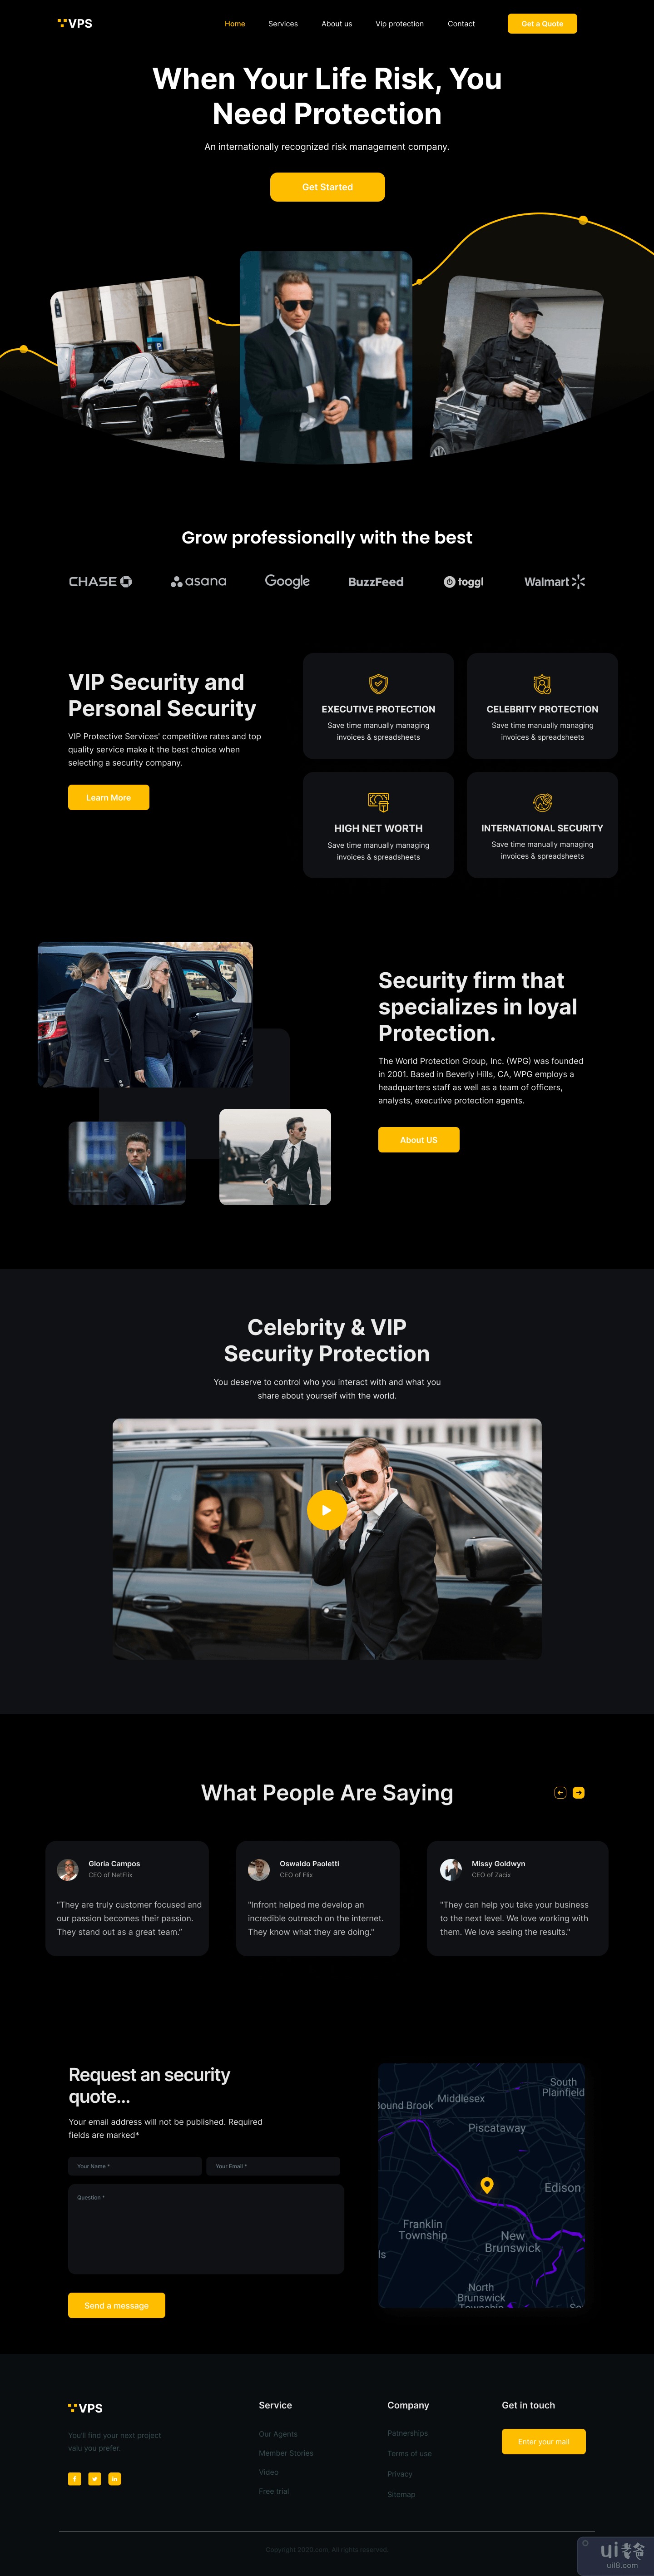 VIP保护和安全服务登陆页面(VIP protection & Security Service landing page)插图